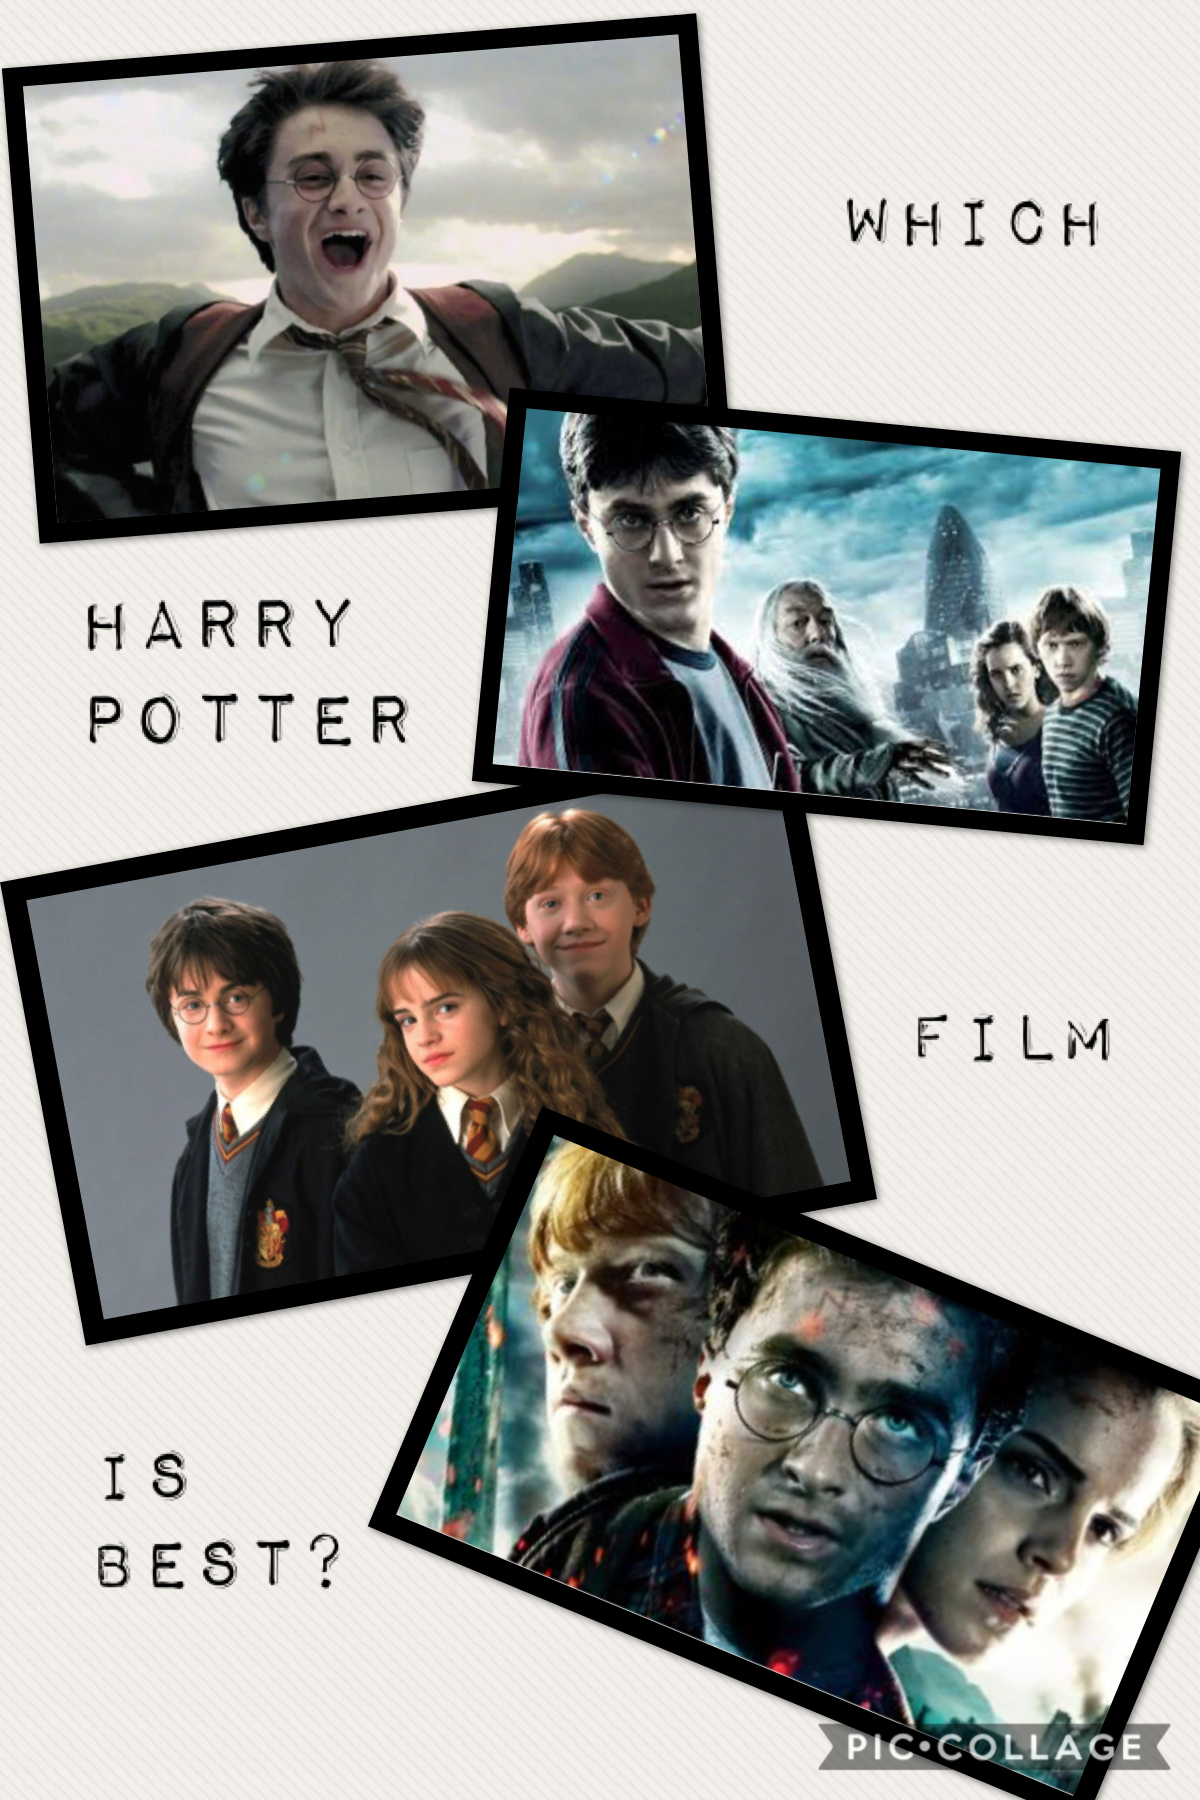 We all love Harry Potter but which film was best?
Comment your house!!! 